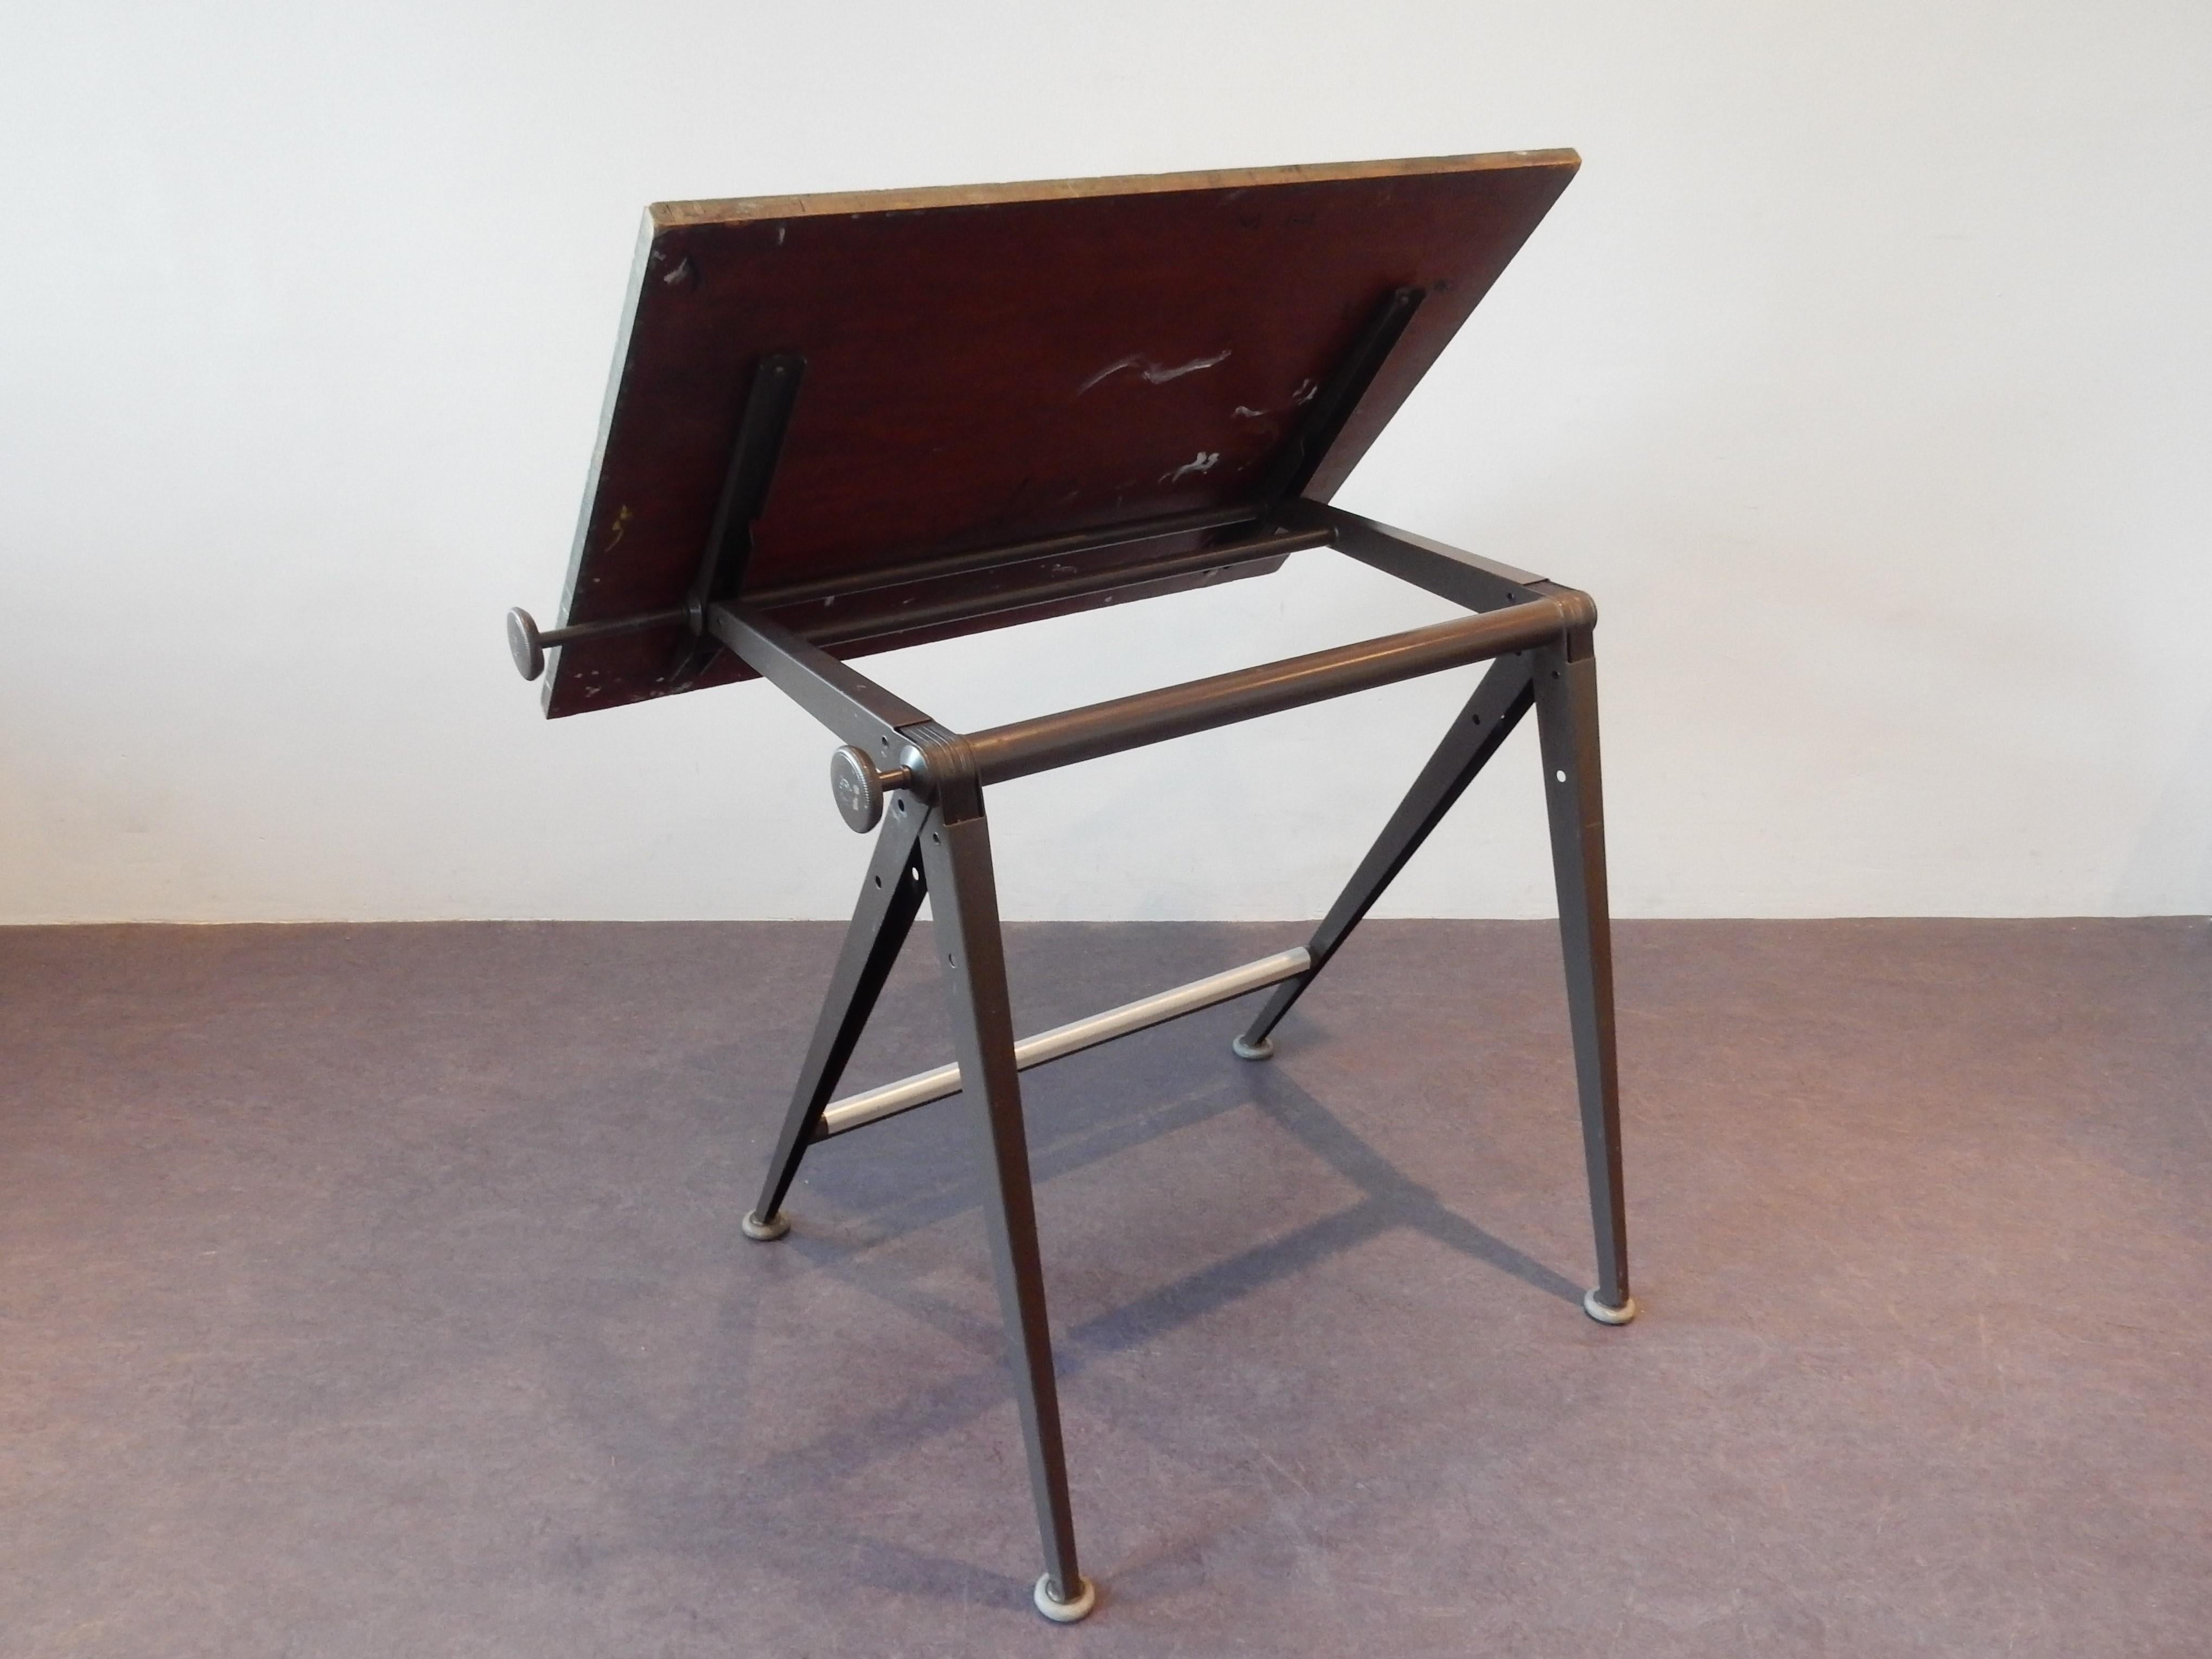 Mid-Century Modern 'Reply' Drafting Table by Friso Kramer and Wim Rietveld for Ahrend, Dutch design